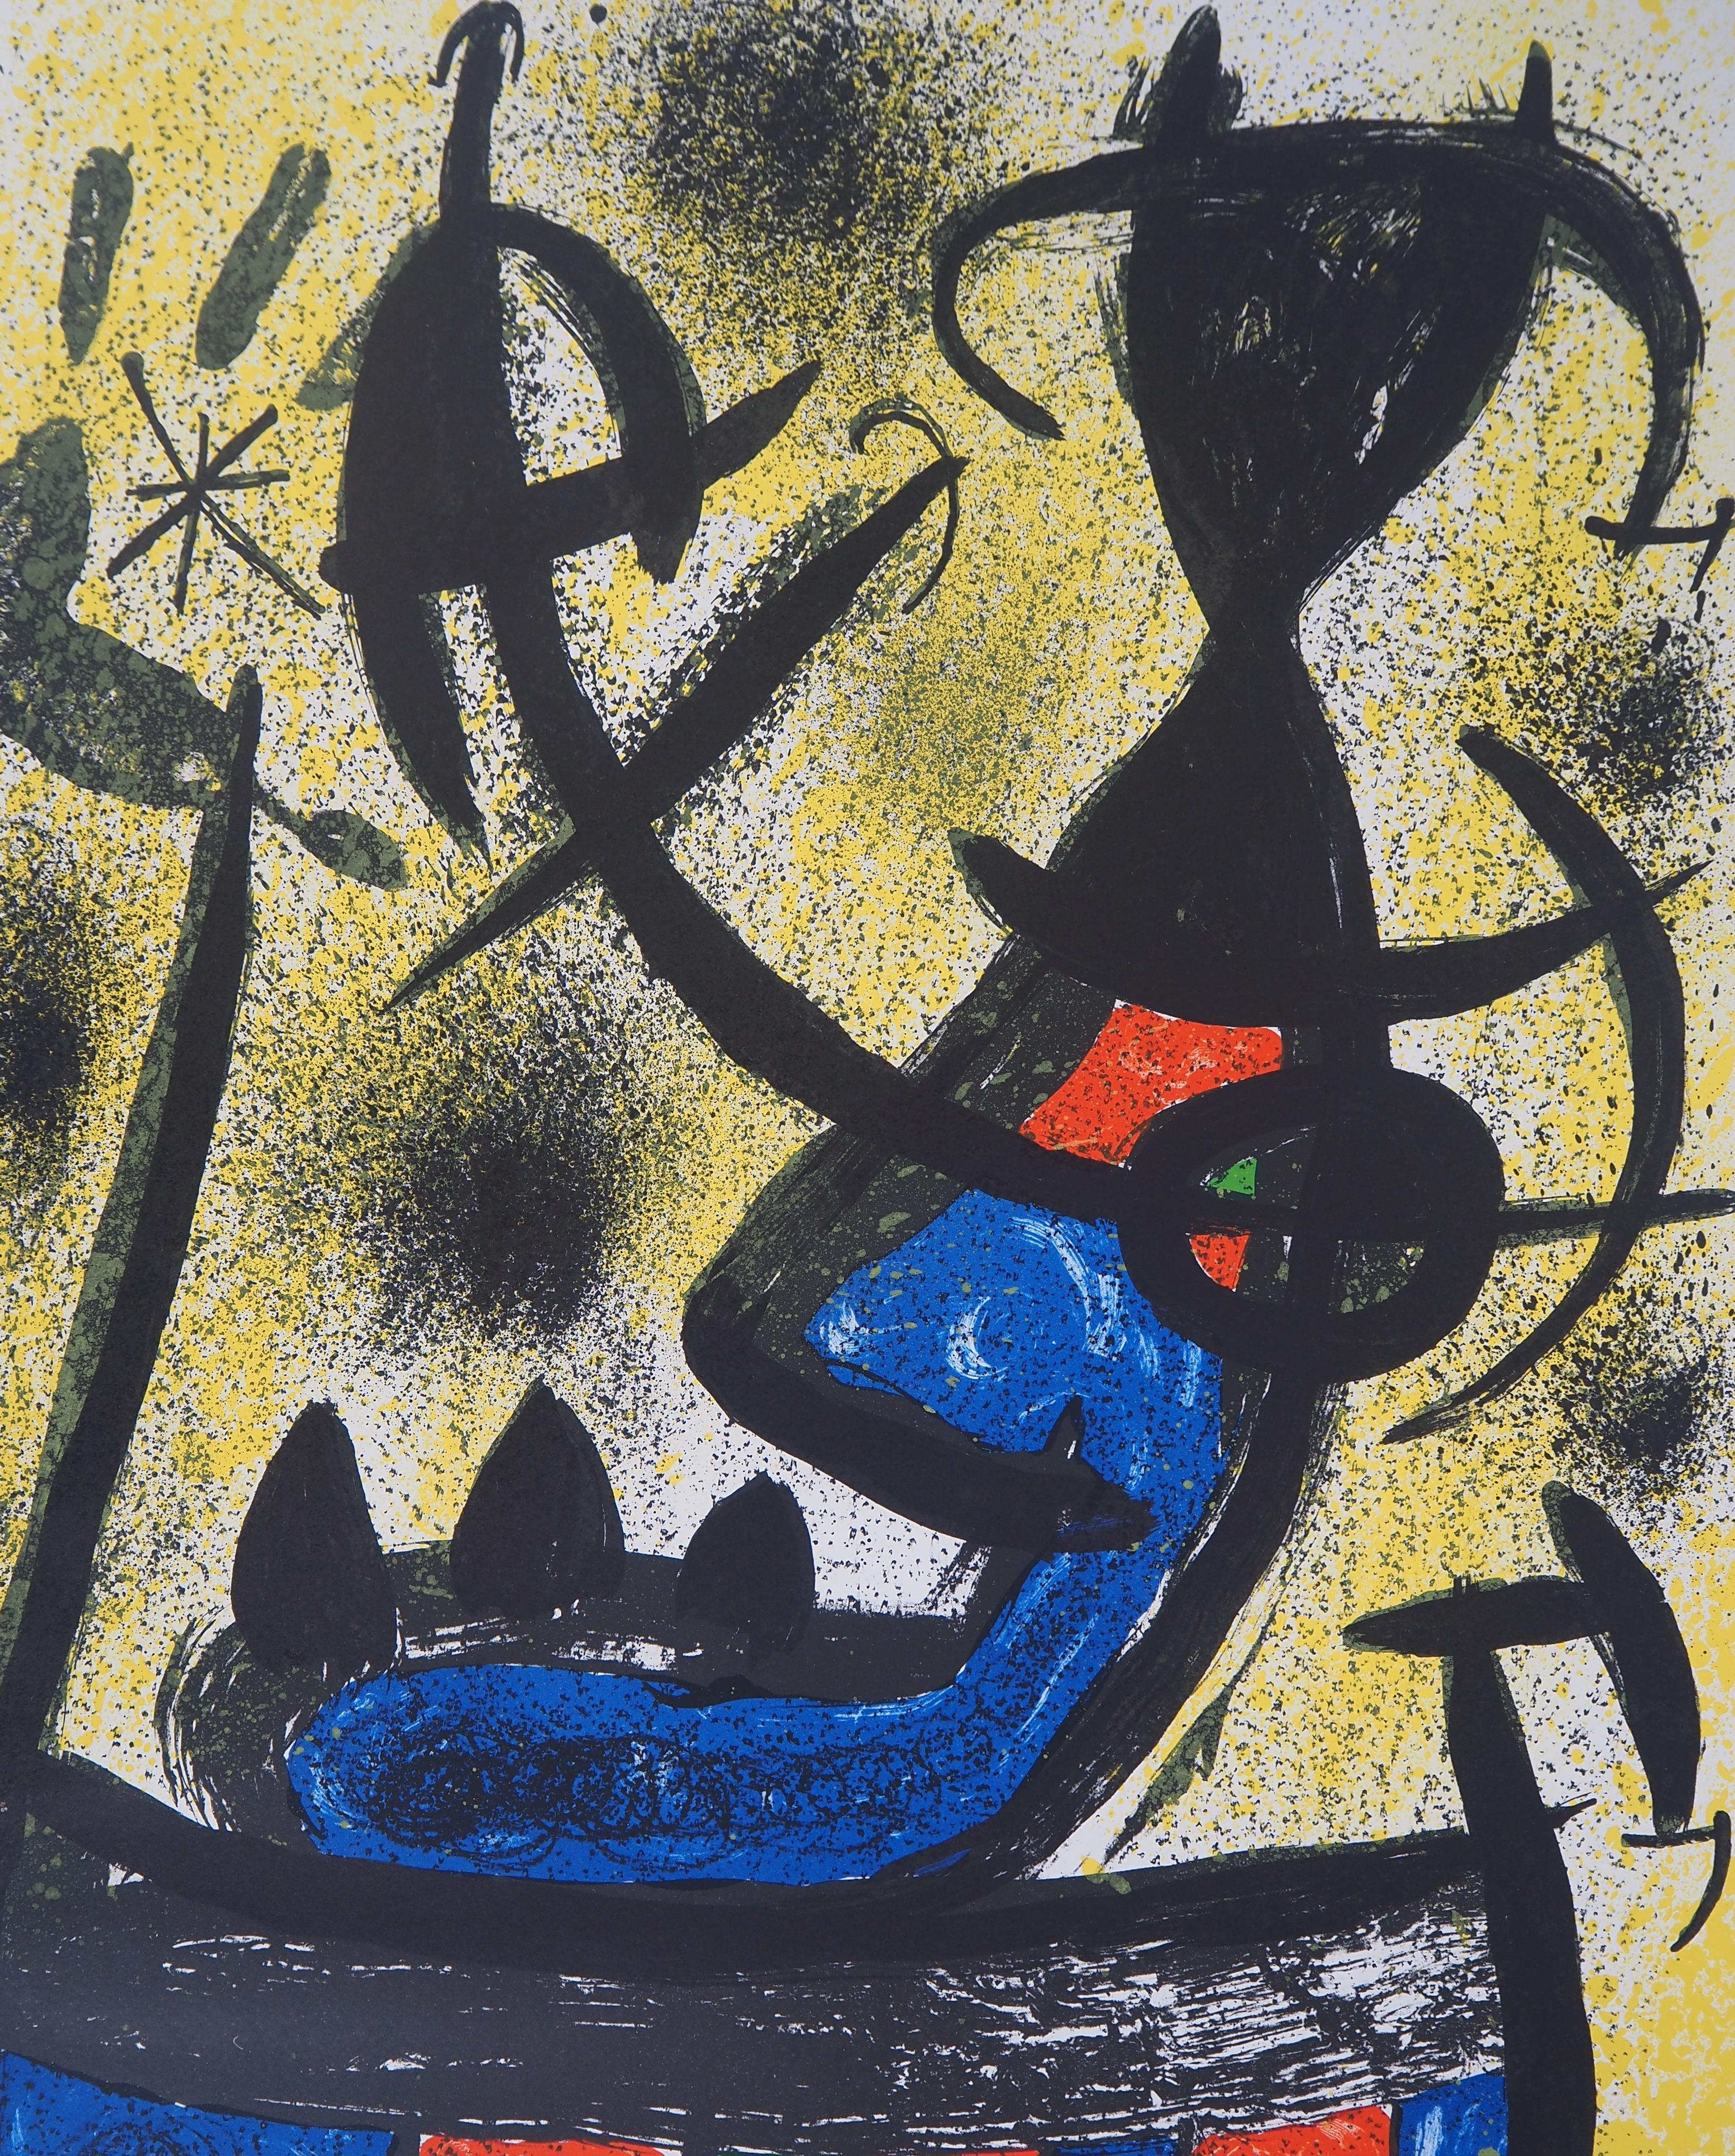 Surrealist Figure - Original Lithograph, Hand Signed (Mourlot #746) - Black Abstract Print by Joan Miró